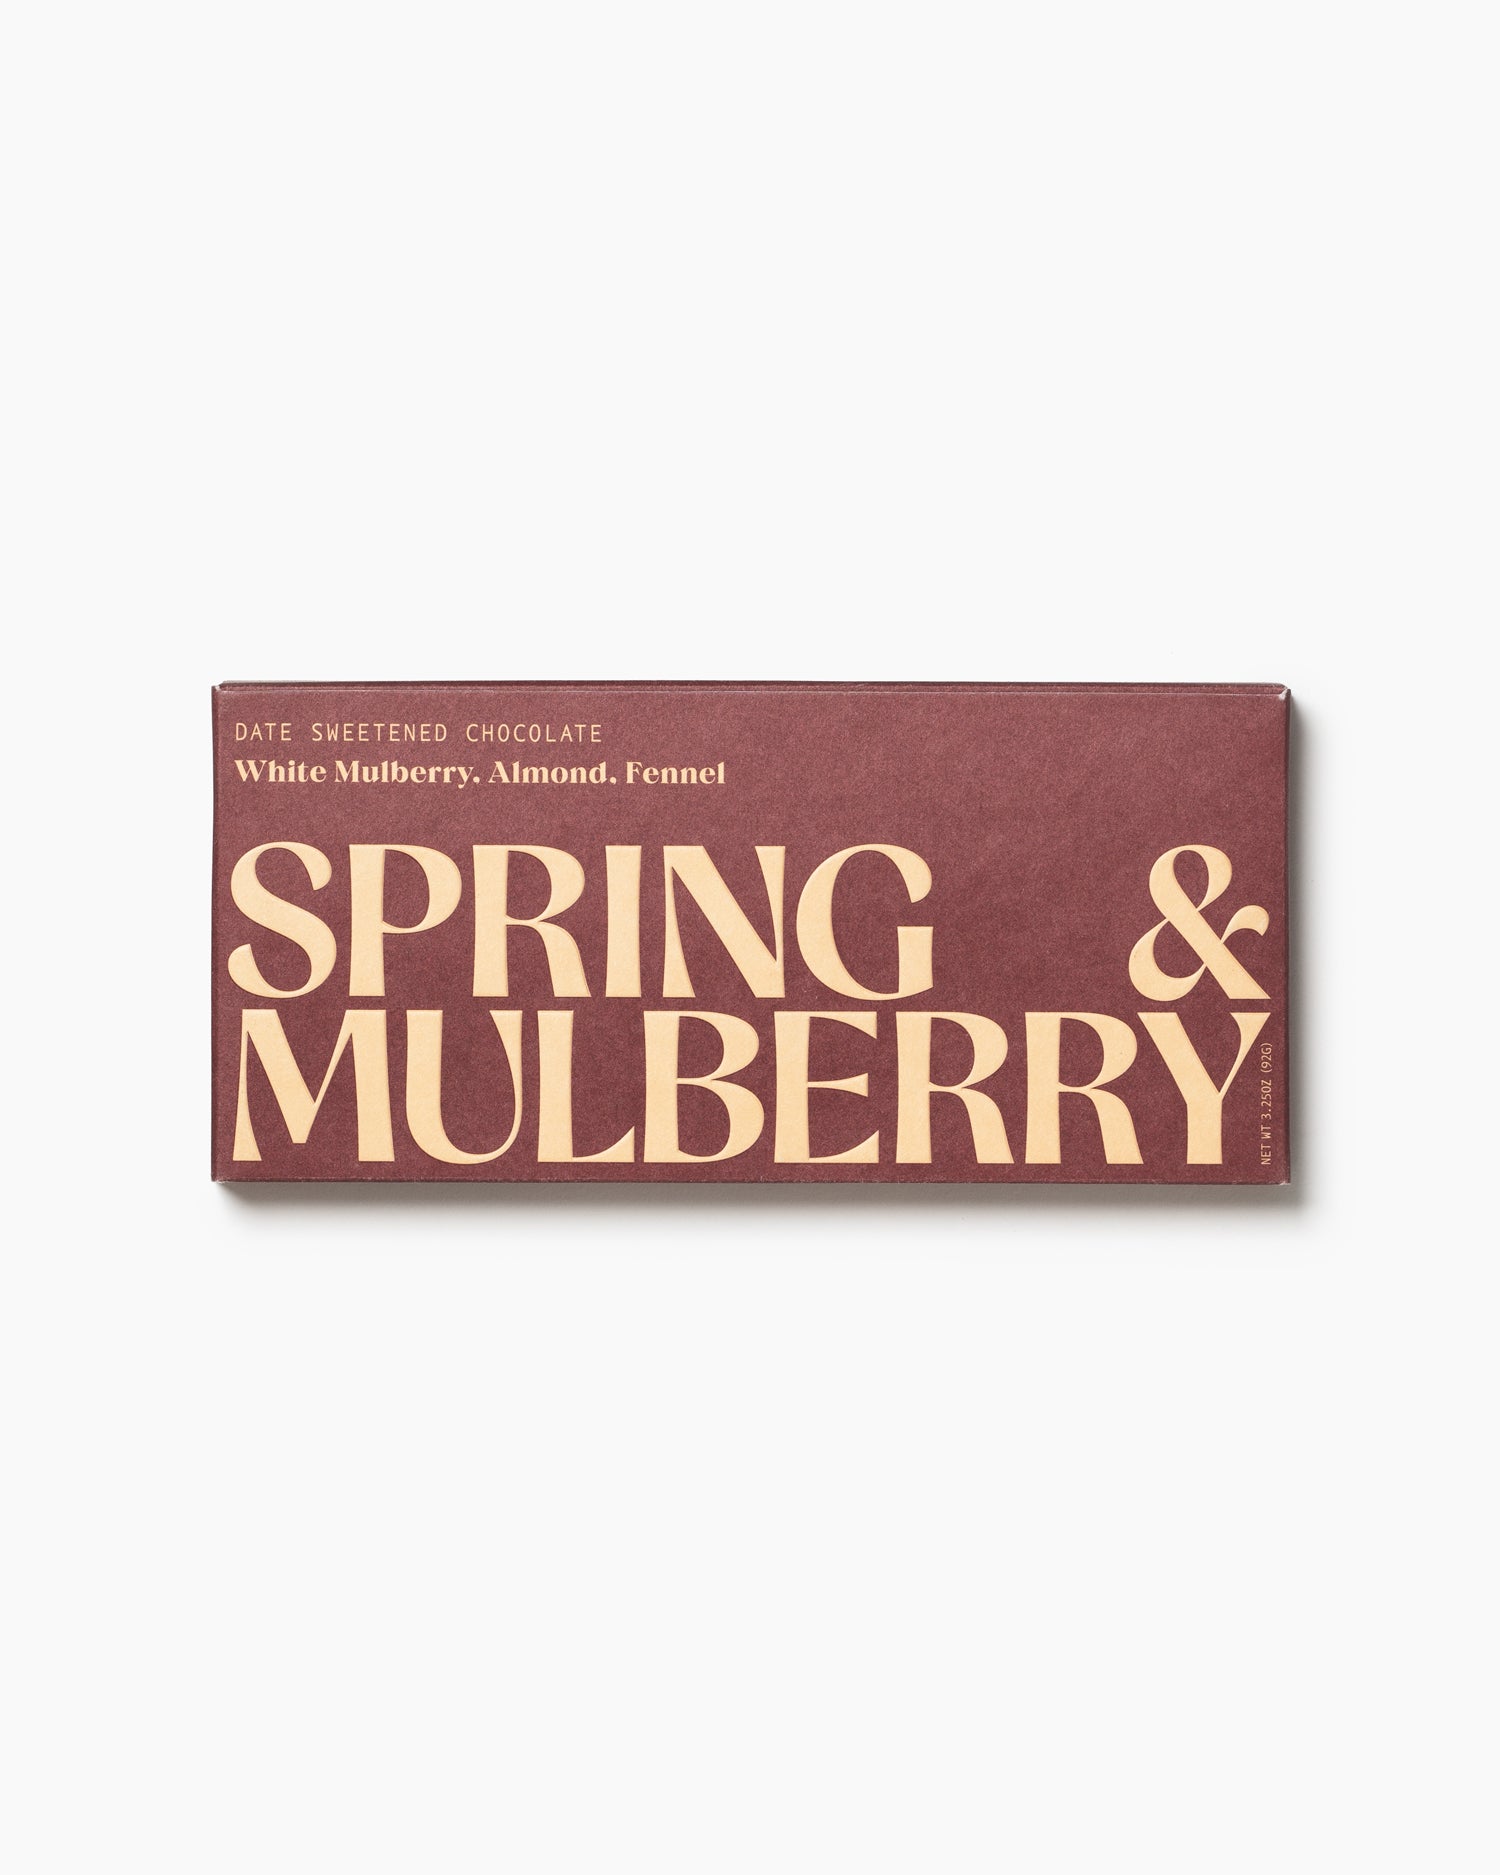 Bar 06 White Mulberry, Almond, Fennel - Spring & Mulberry